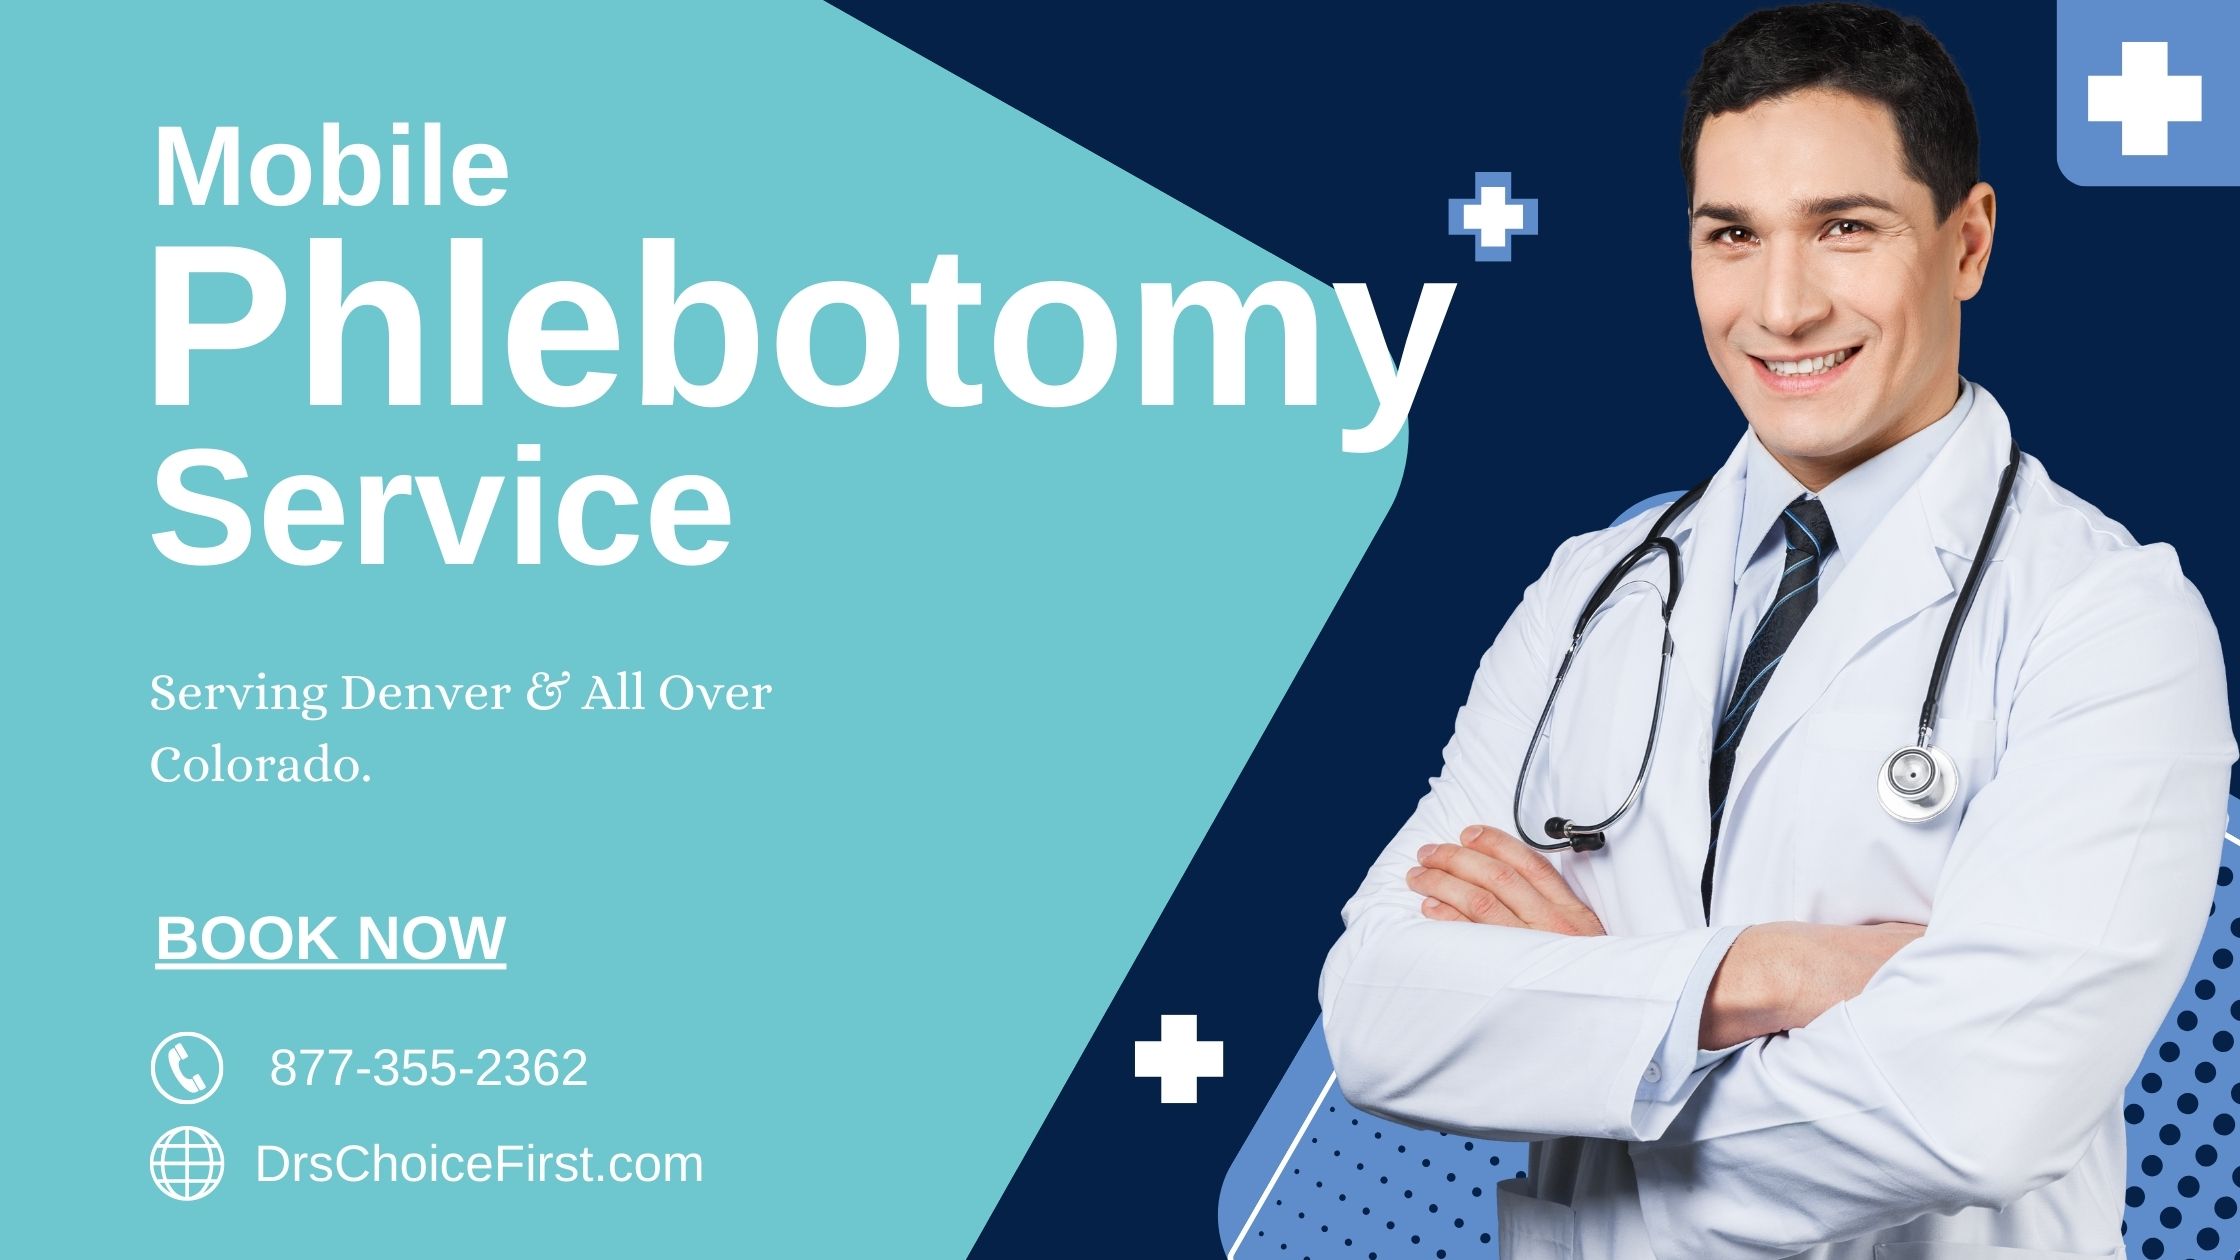  Direct to patient phlebotomy services